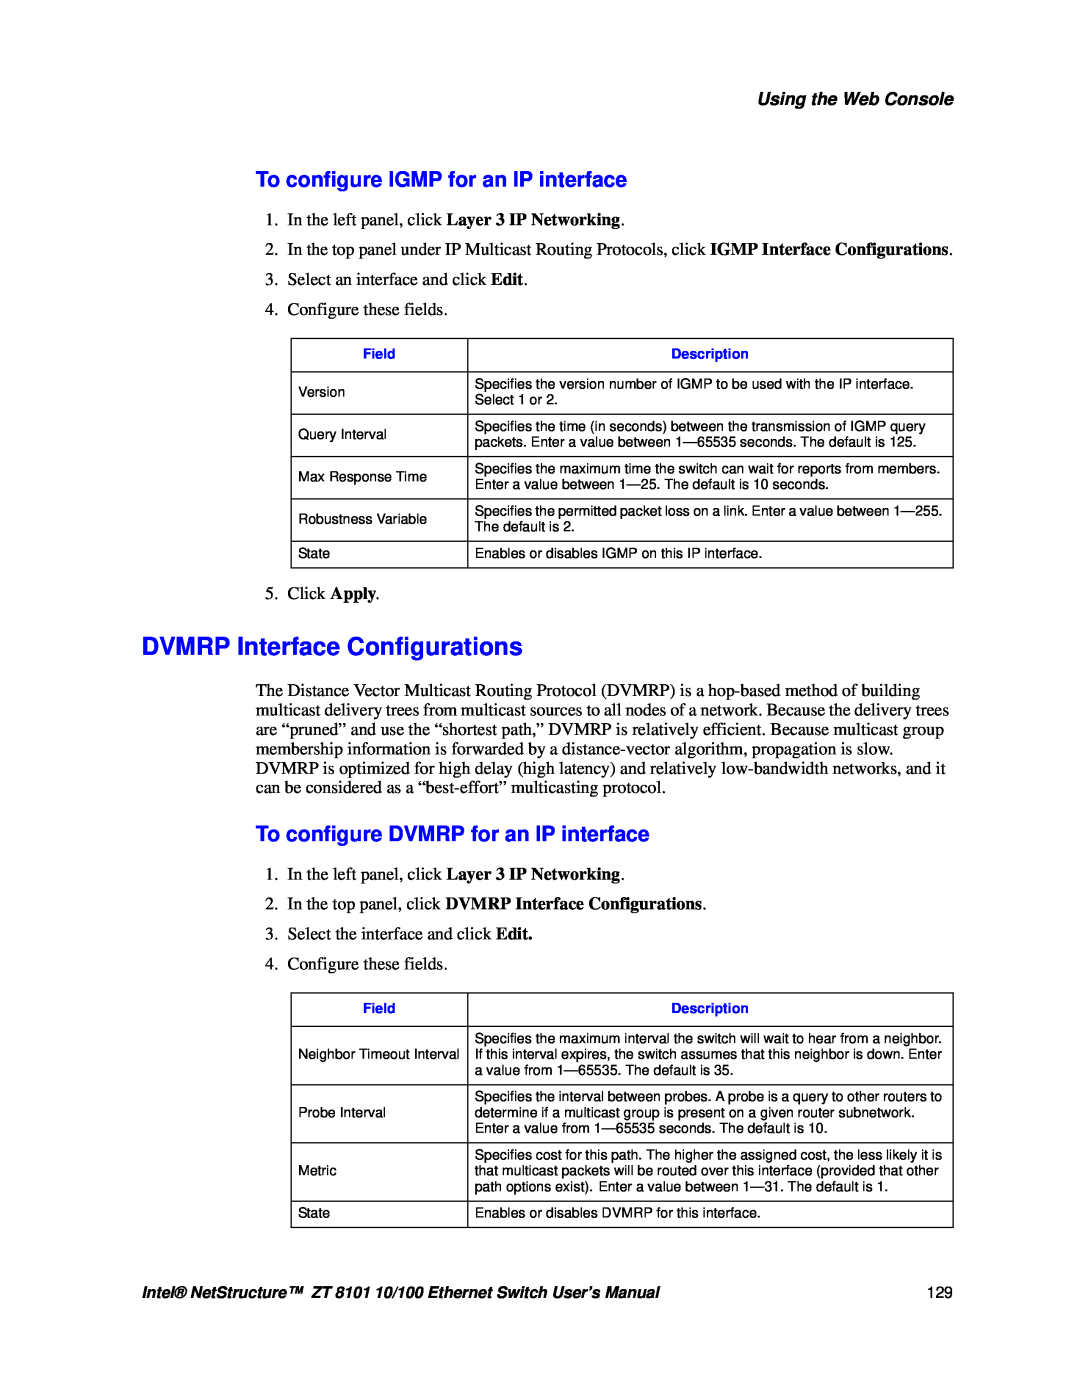 Intel ZT 8101 10/100 DVMRP Interface Configurations, To configure IGMP for an IP interface, Using the Web Console 